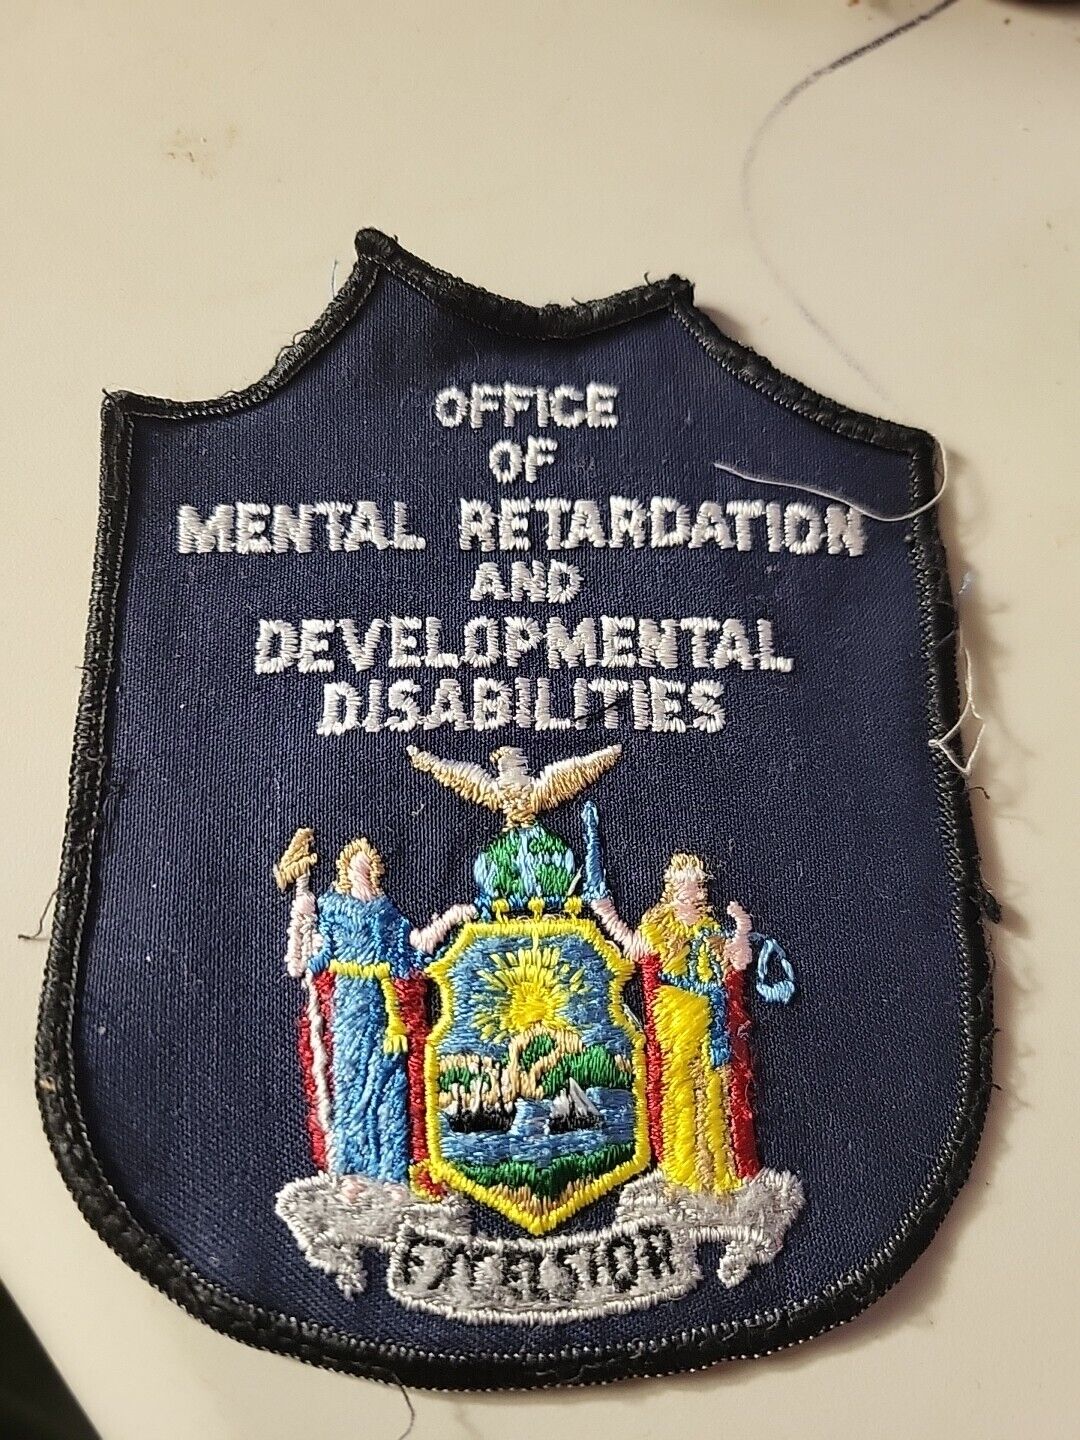 Vintage New York State office of mental retaddition and development disabilities